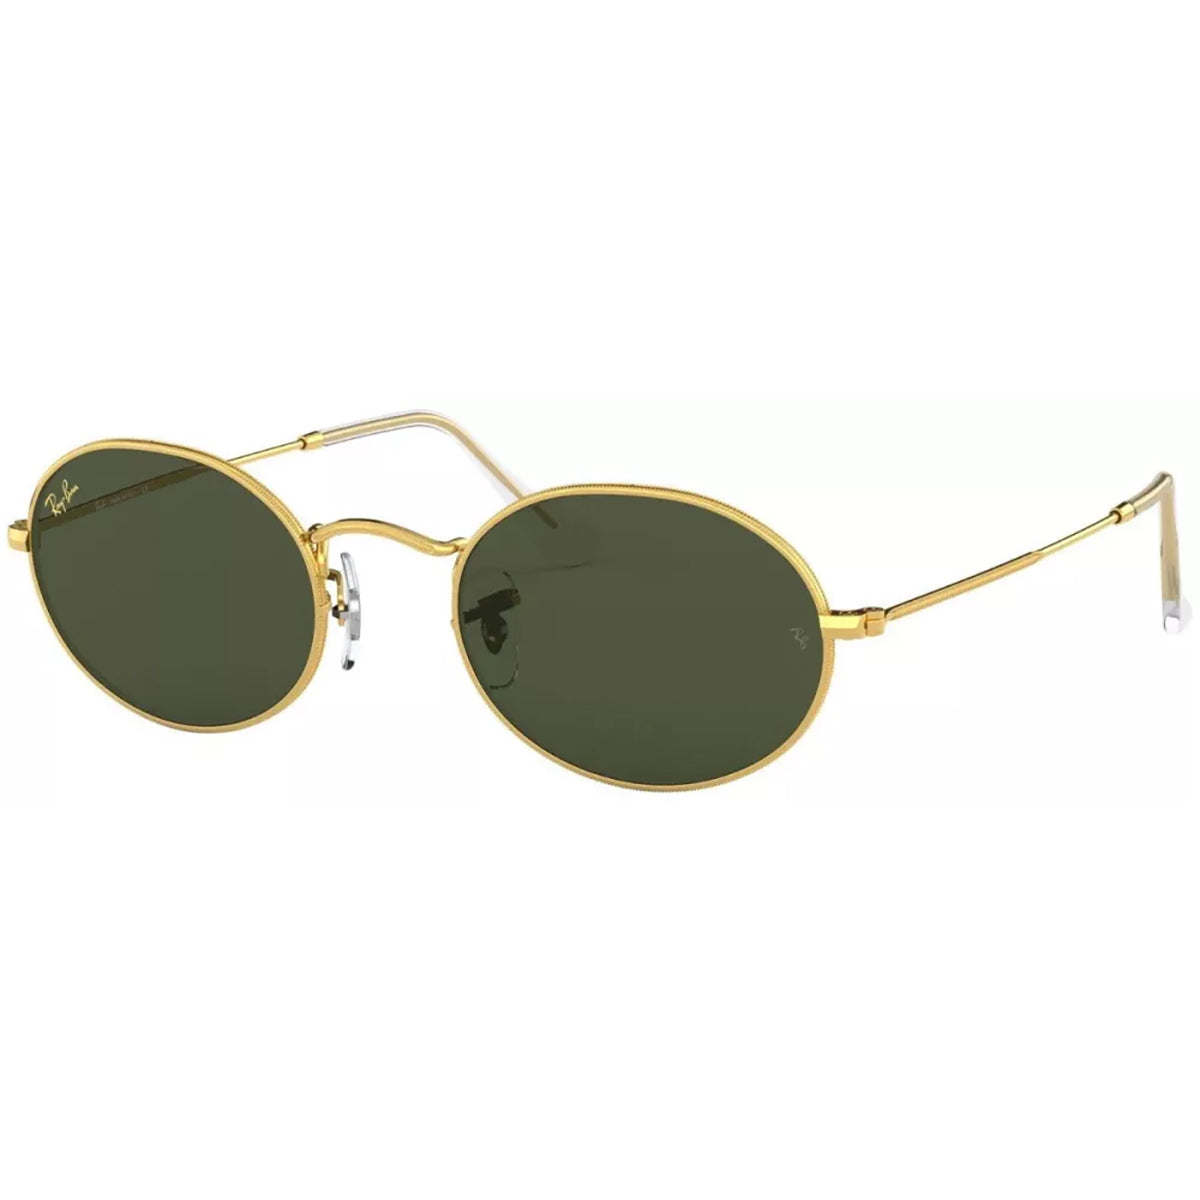 Ray-Ban Oval Men's Lifestyle Sunglasses-0RB3547